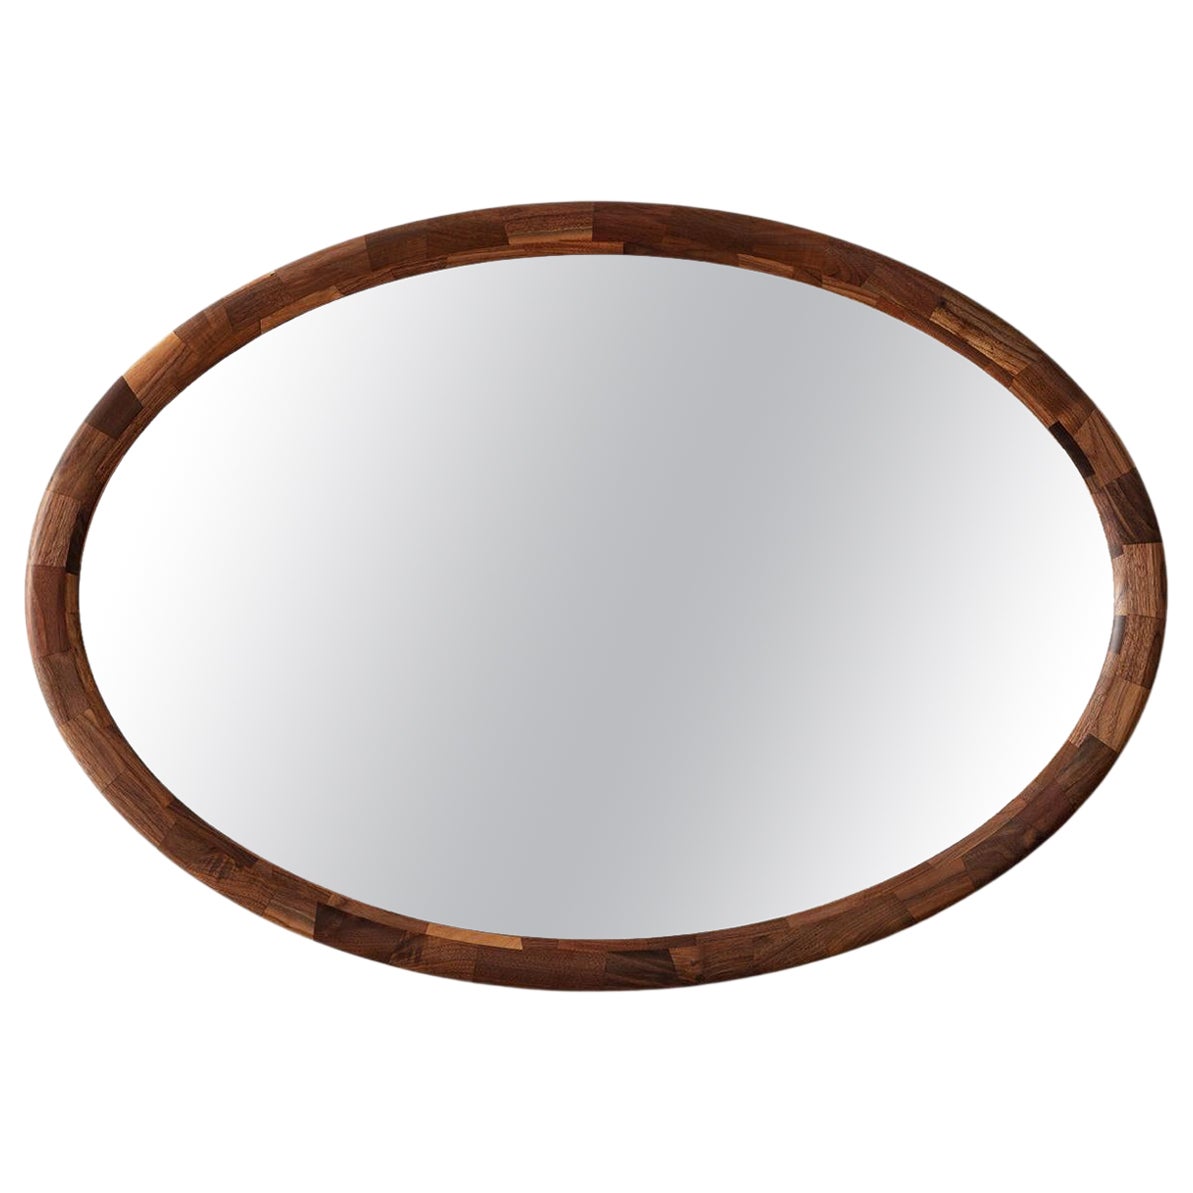 STACKED Horizontal Oval Mirror by Richard Haining, Walnut is Available Now